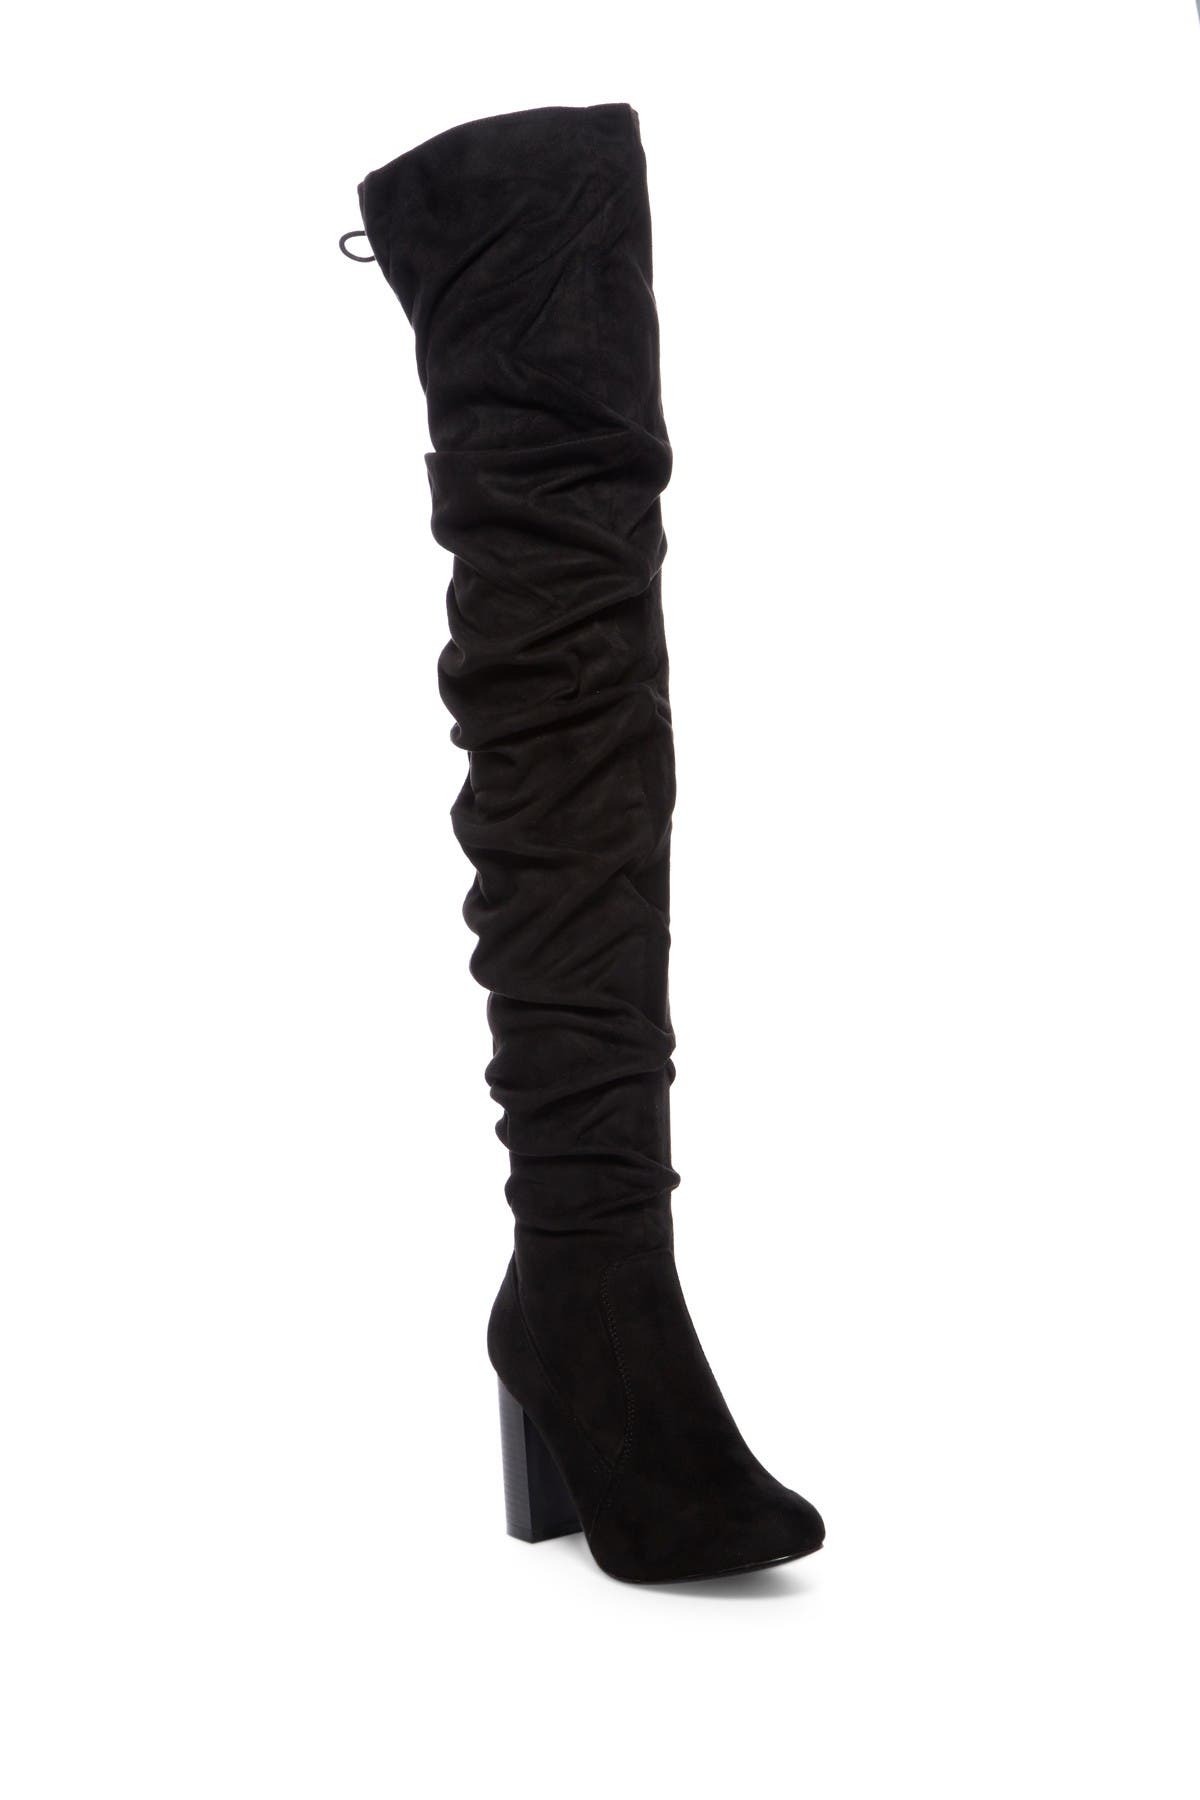 black slouchy thigh high boots